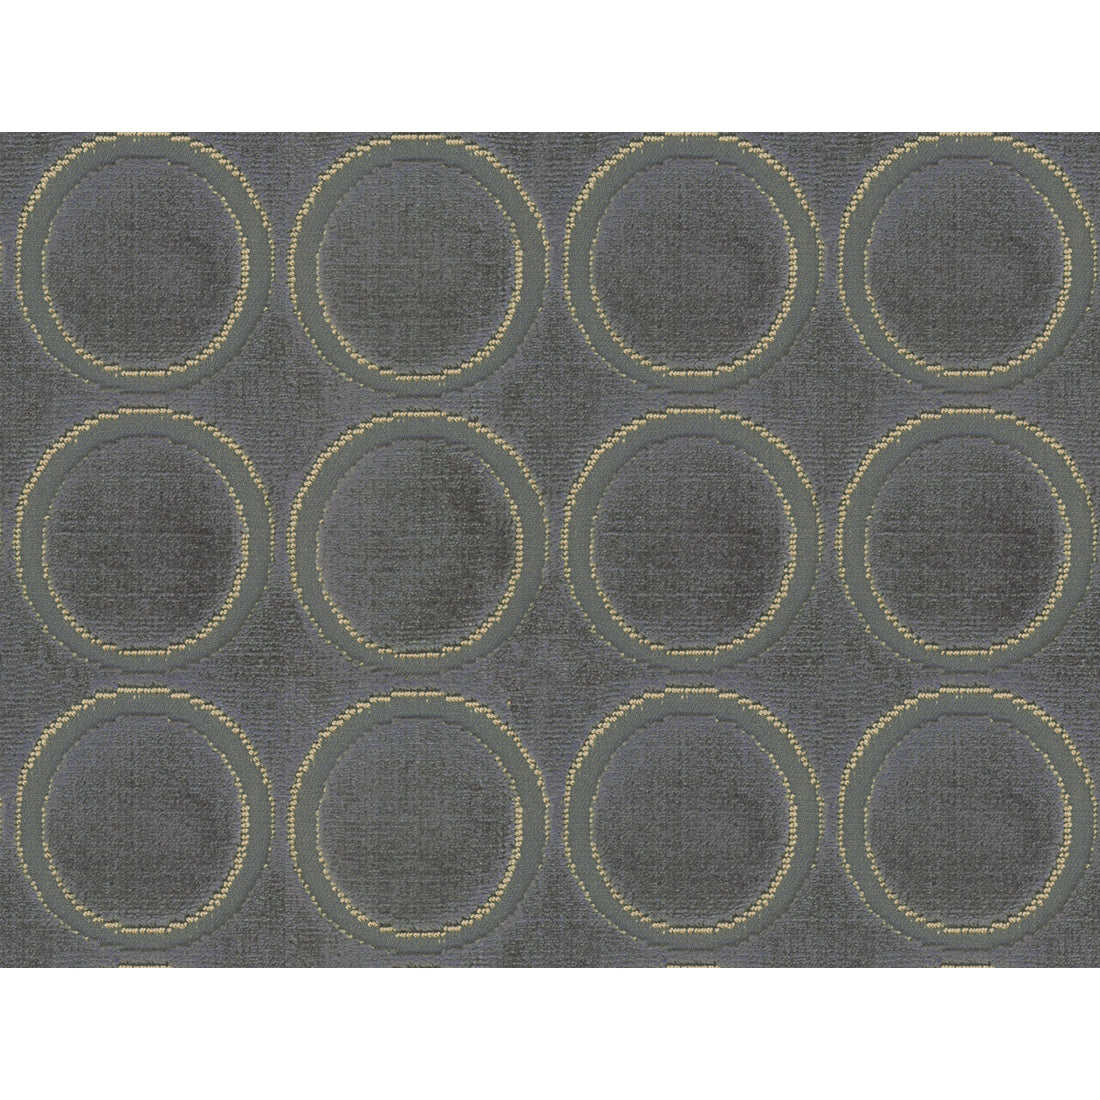 Ellipsis fabric in steel color - pattern 34465.21.0 - by Kravet Couture